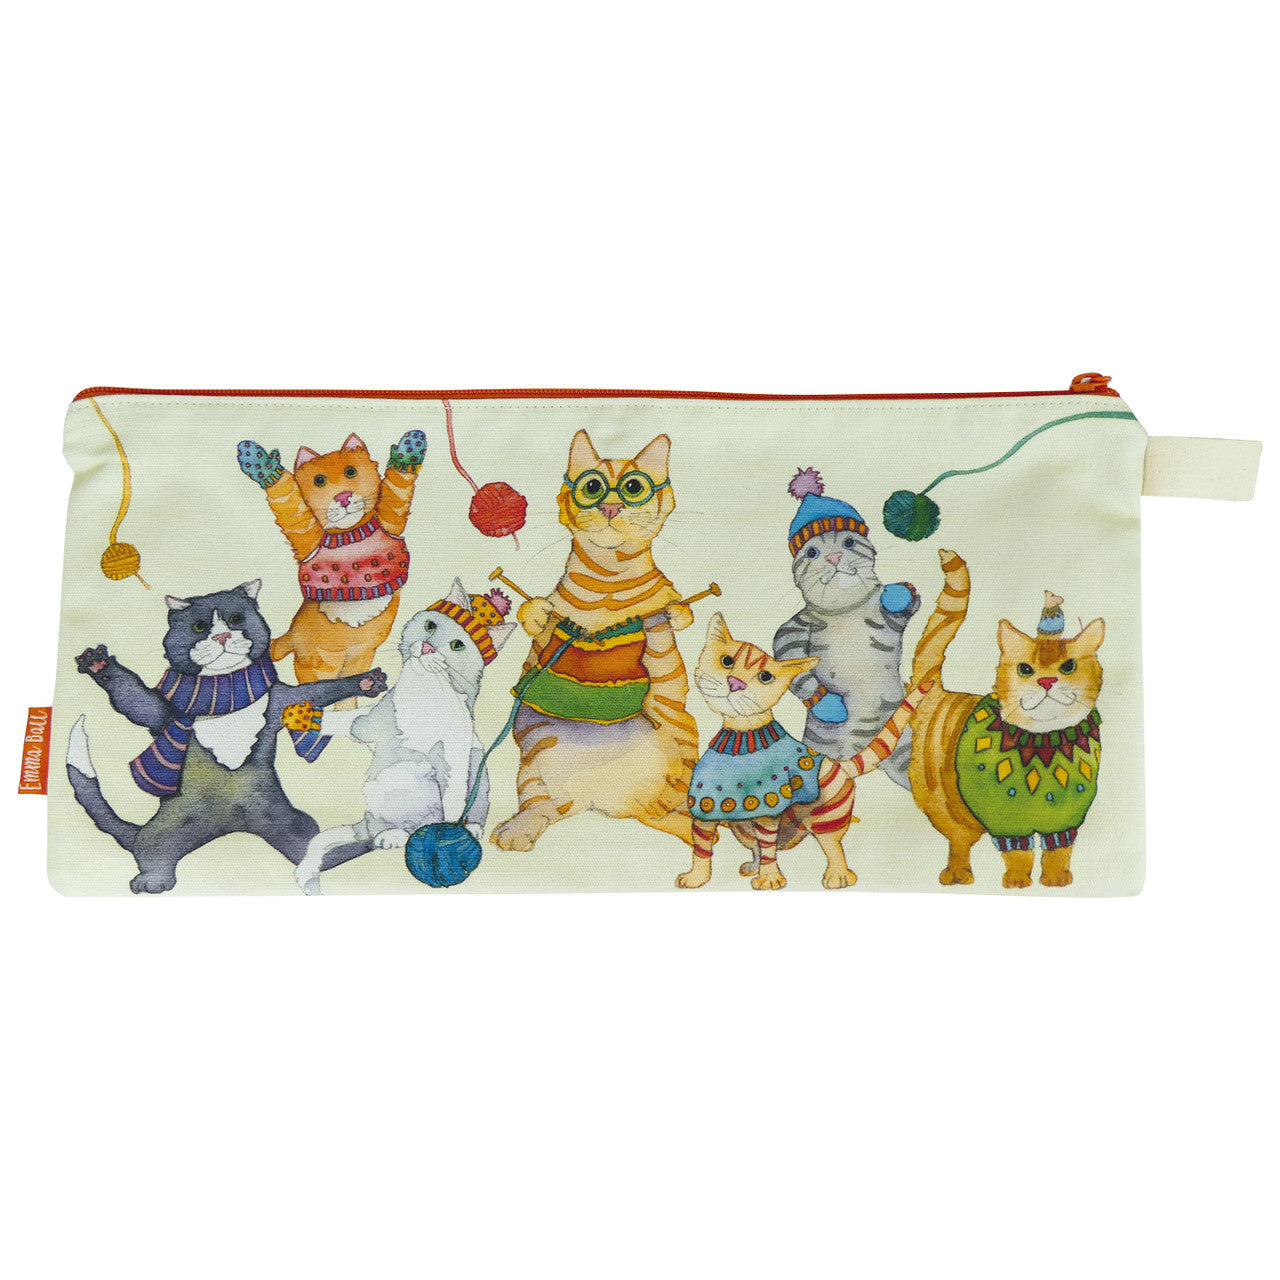 Kittens in Mittens Long Project Bag from Emma Ball,